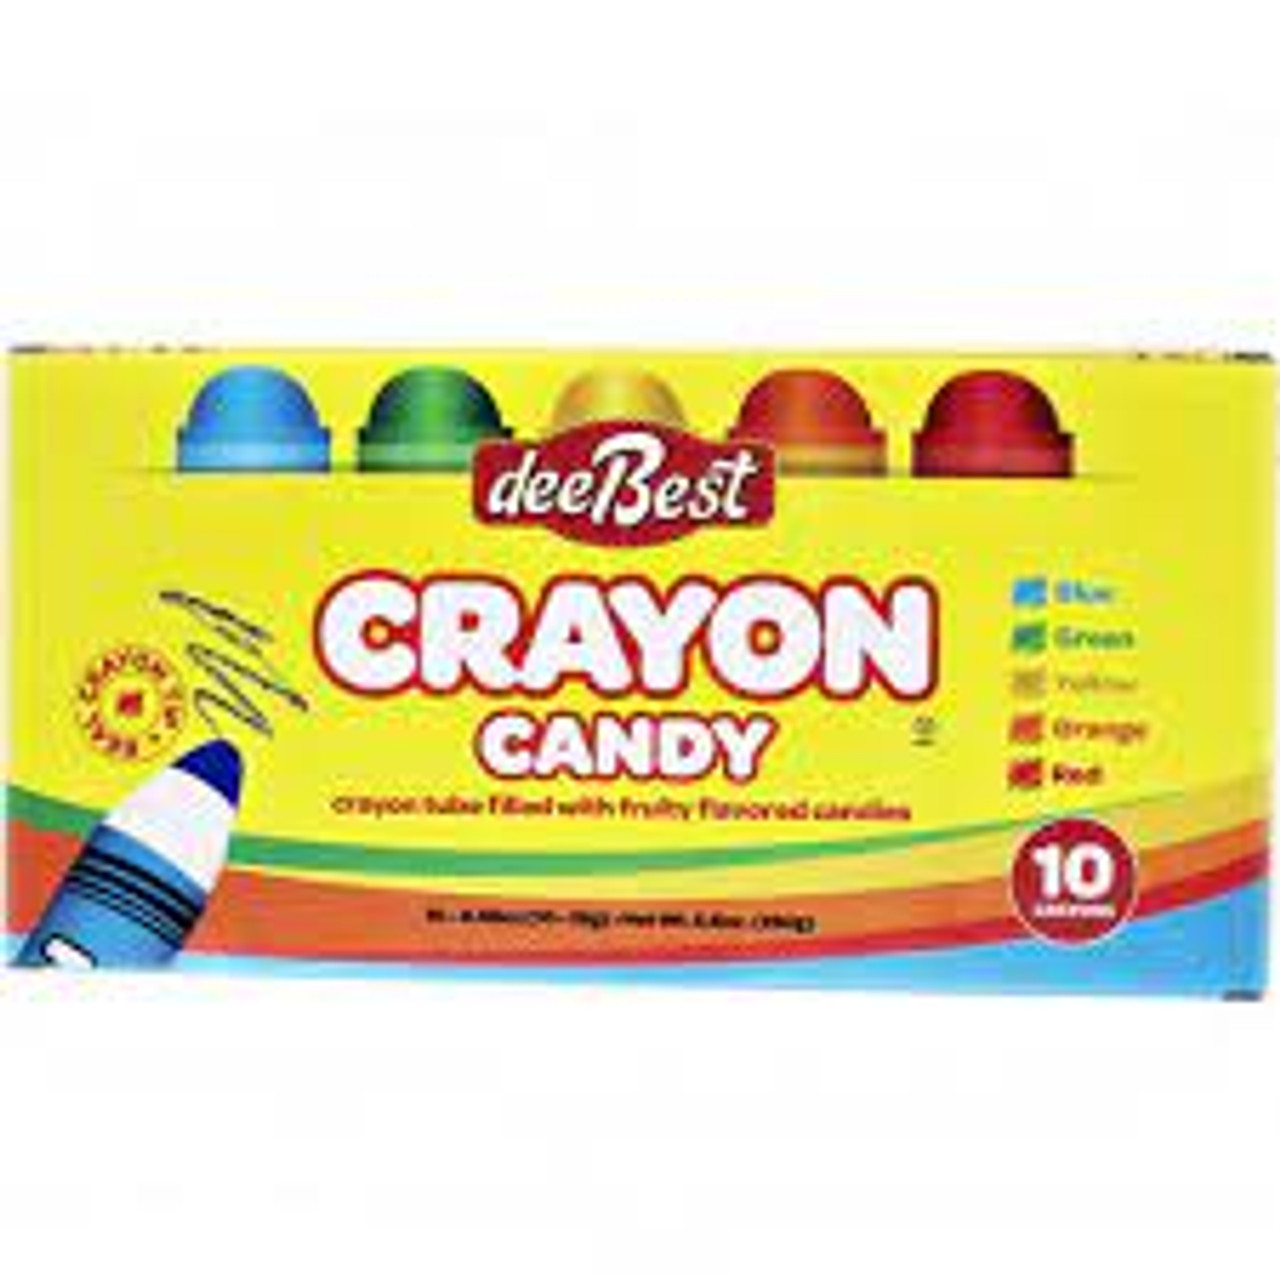 deeBest Crayon Candy - The Candy Store